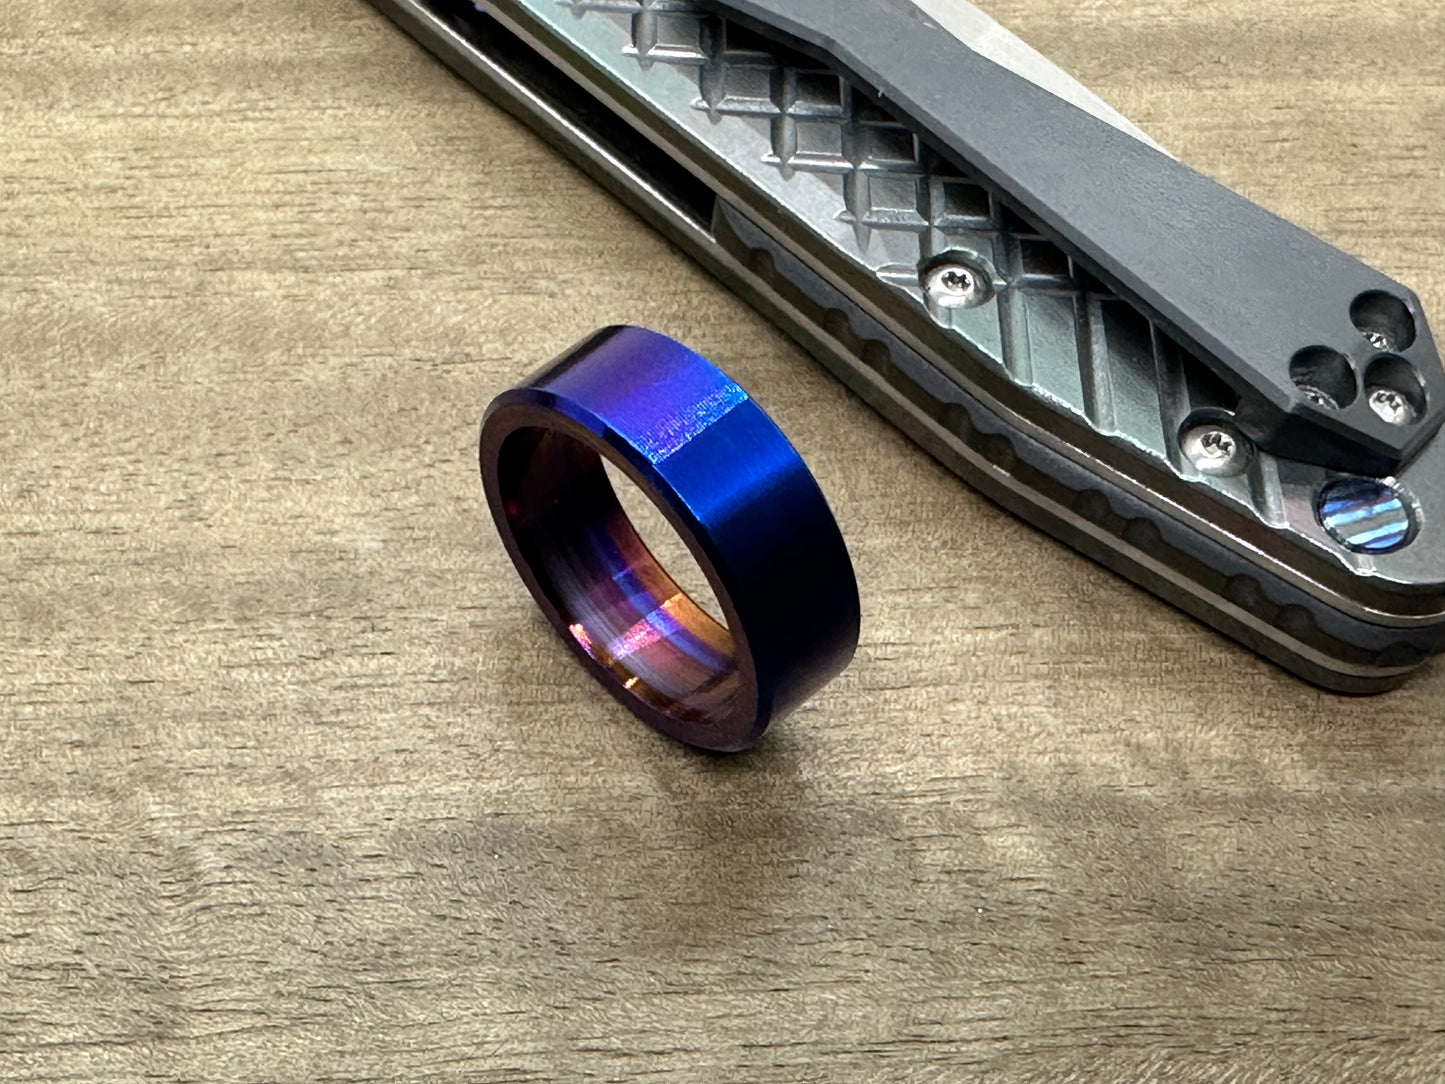 ESSENTIAL Flamed Blue-Purple TITANIUM Ring US Size: 10 / Pendant / SpinTop Stand